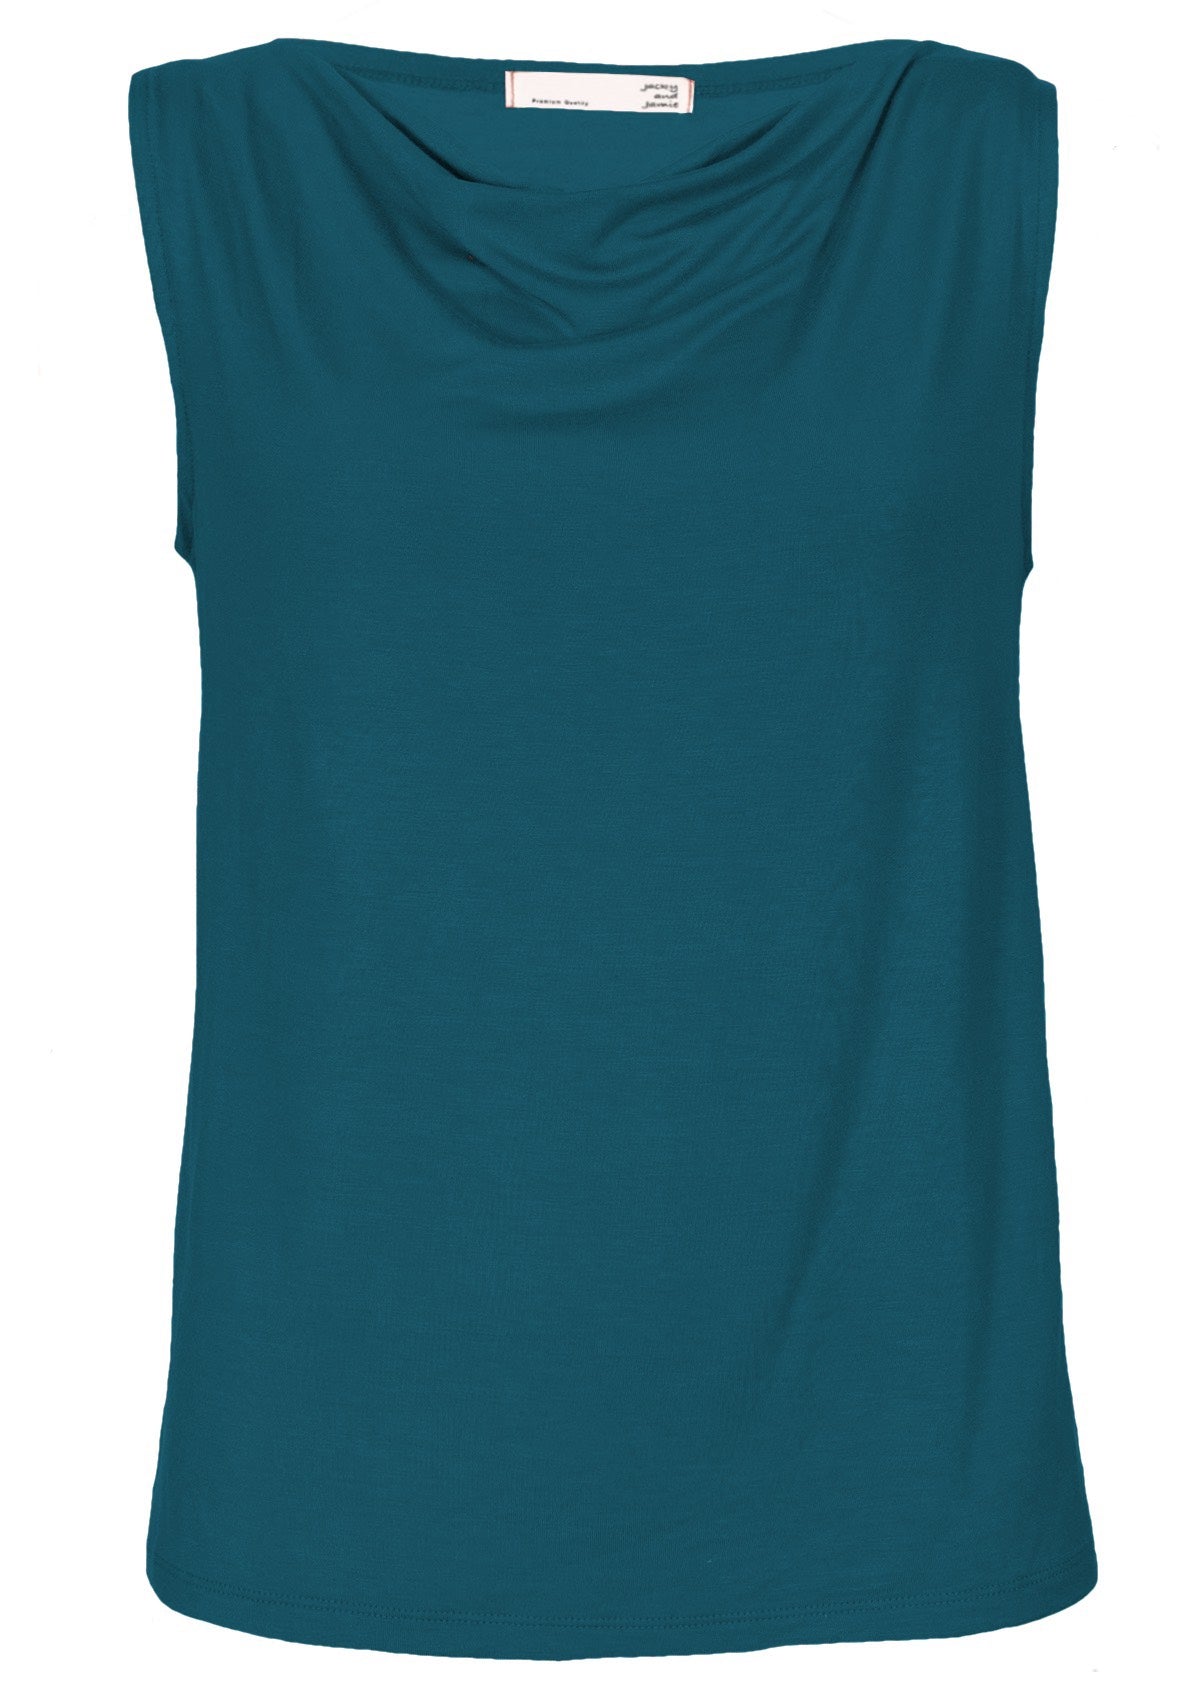 Front view women's basic teal top